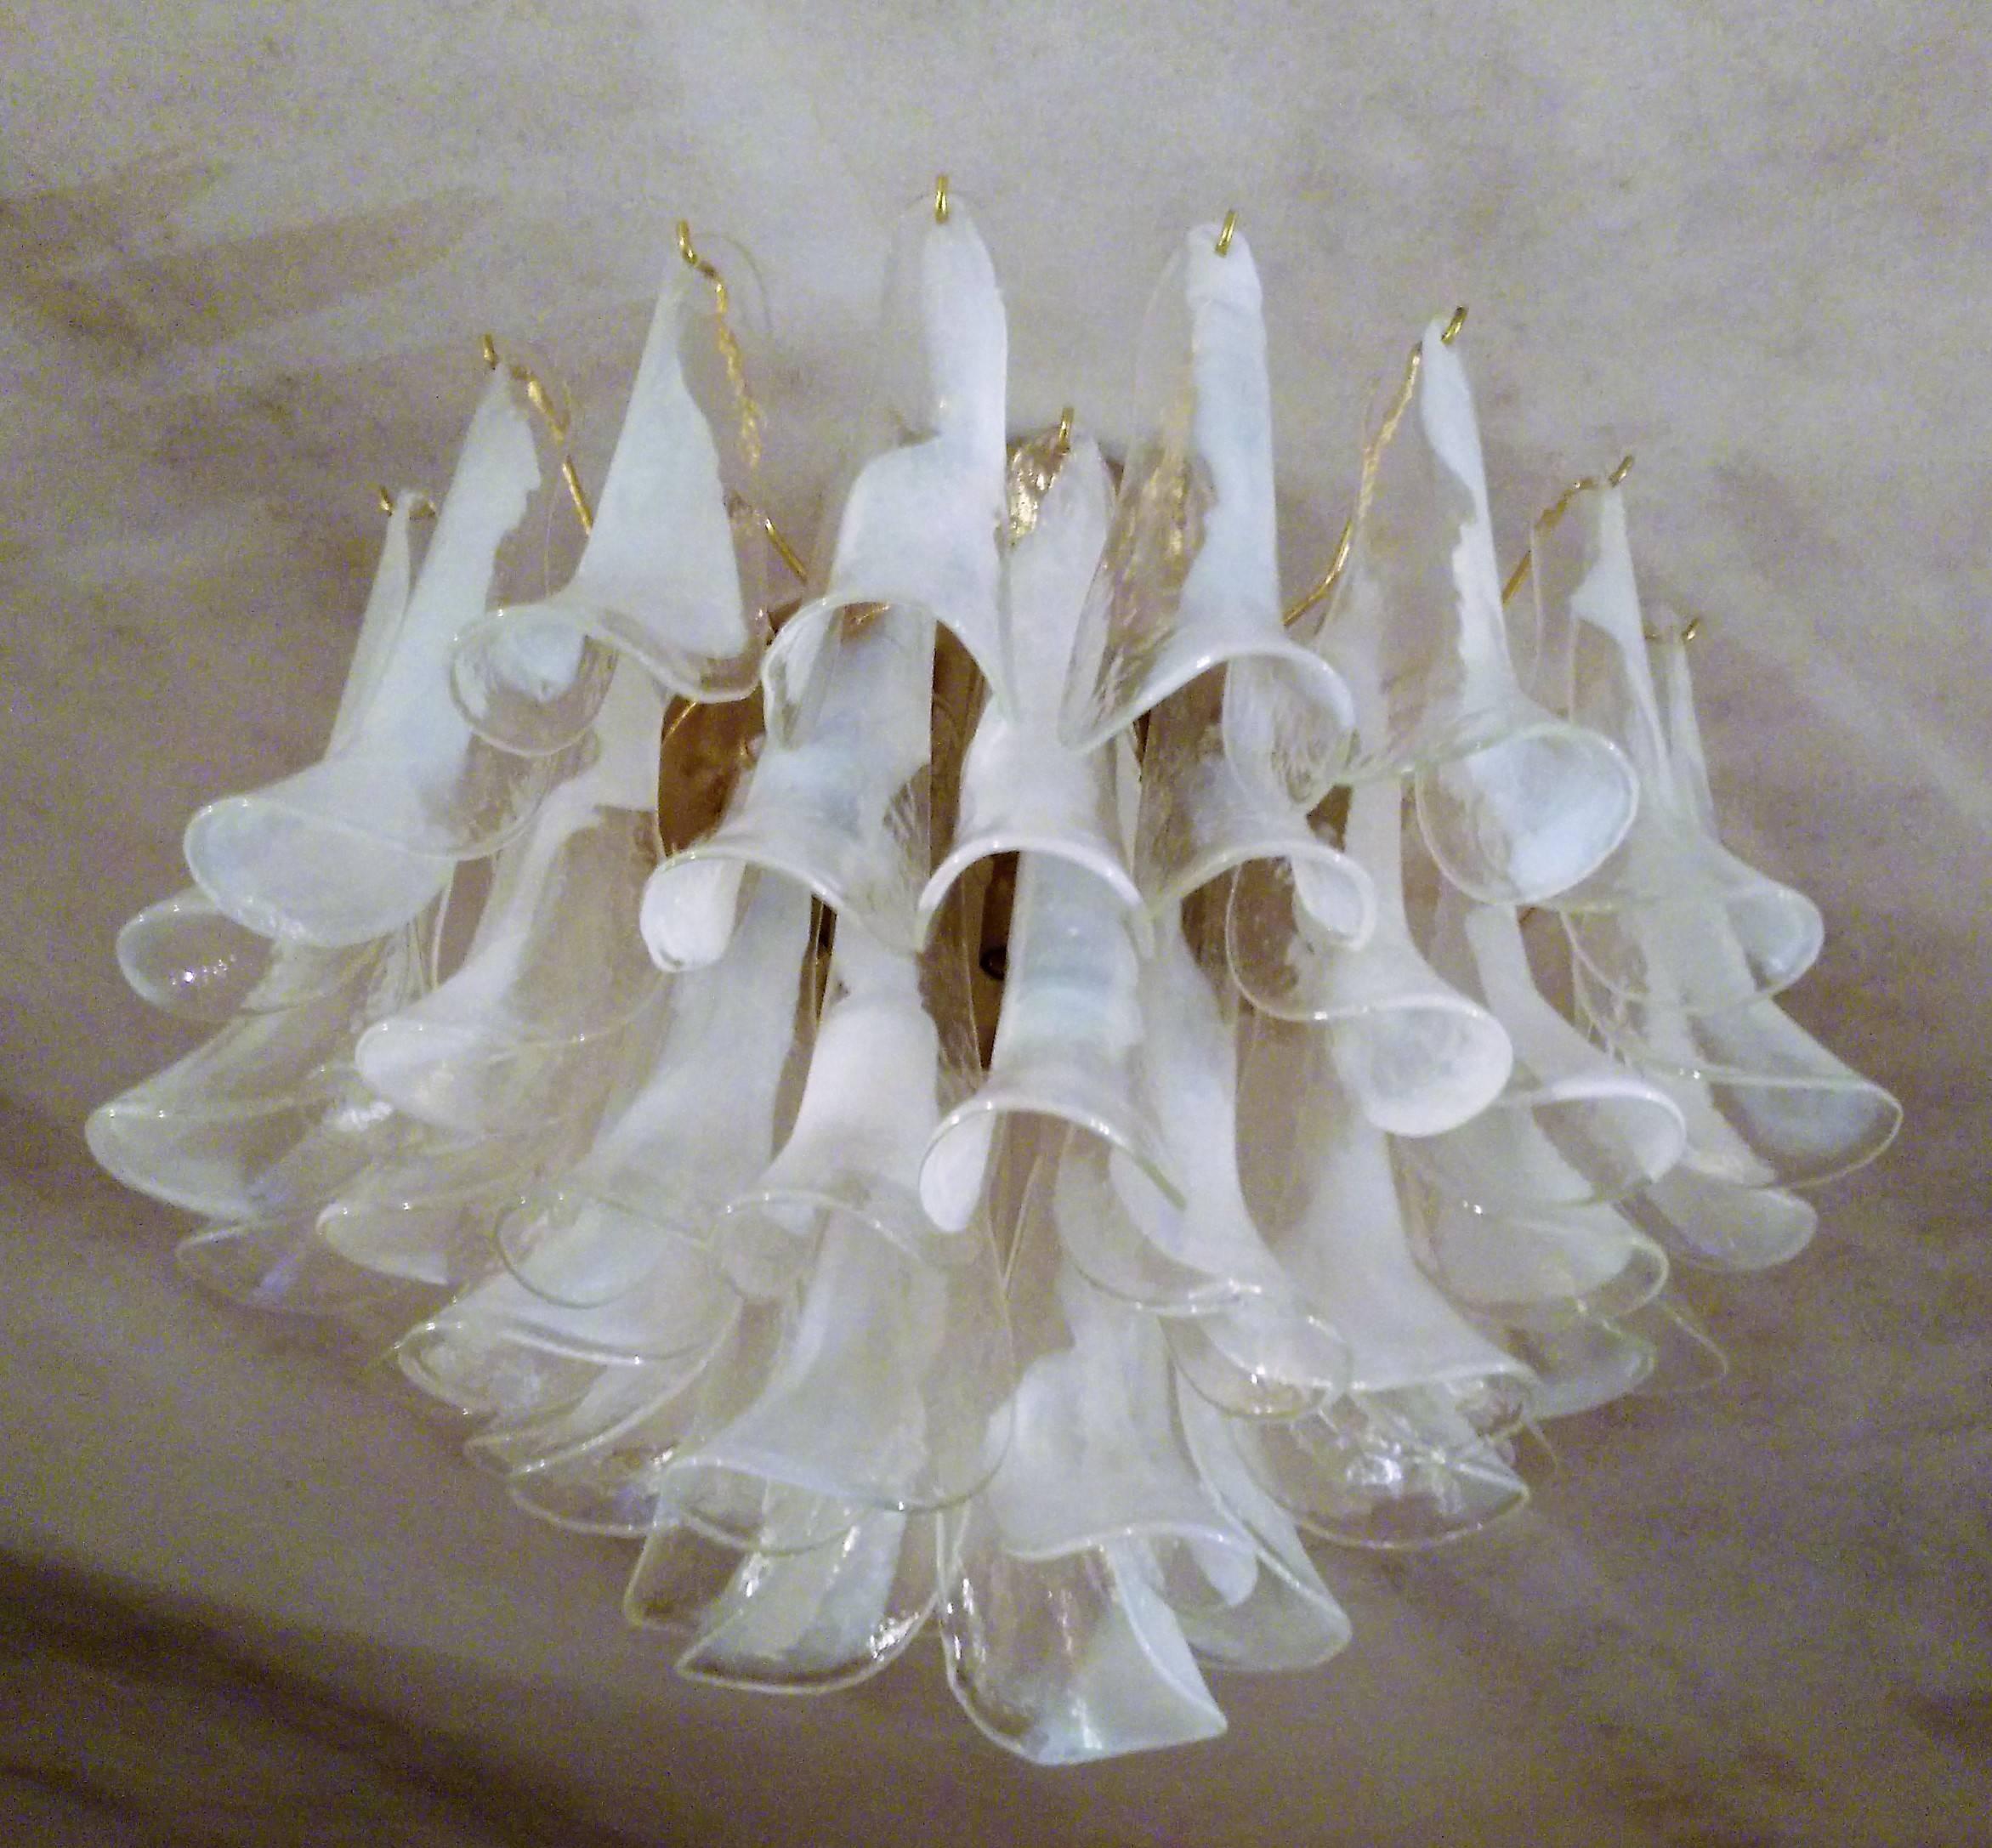 Pair of signed clear and white Murano glass chandeliers by La Murrina, consisting of 52 petals and every one bears a 